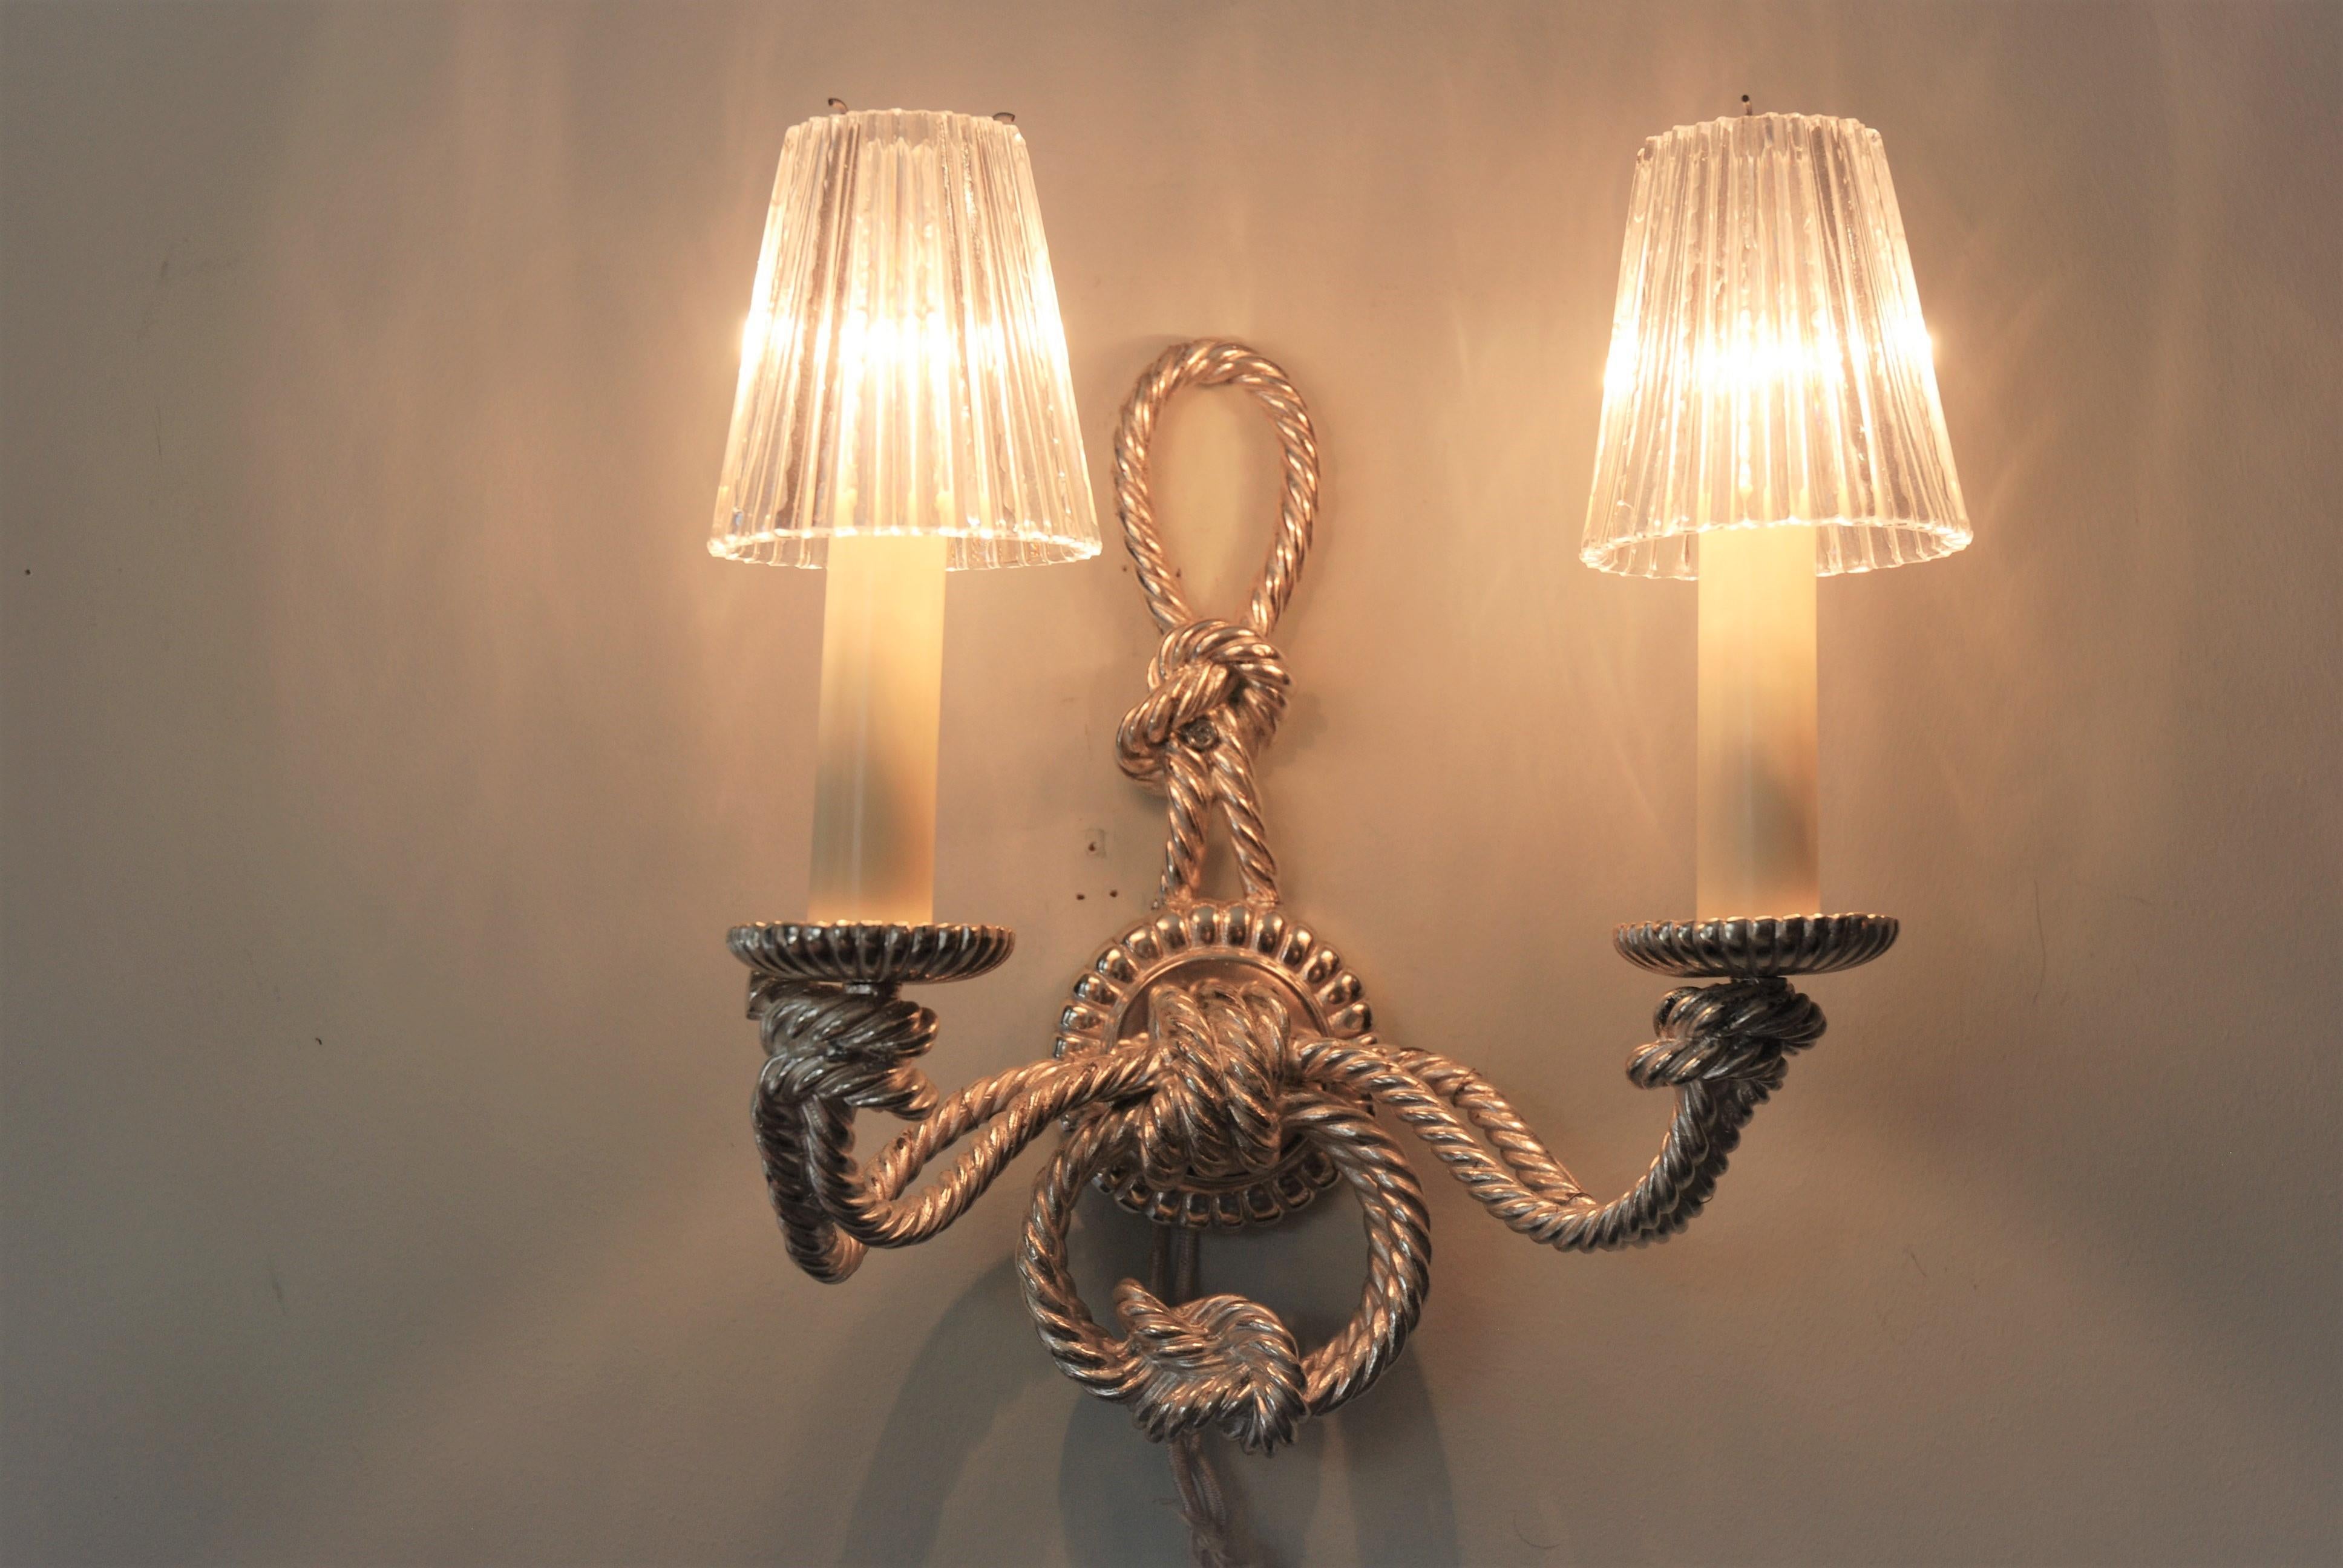 Pair of French sconces - silver color twisted metal in a cord style
Glass lampshades included.